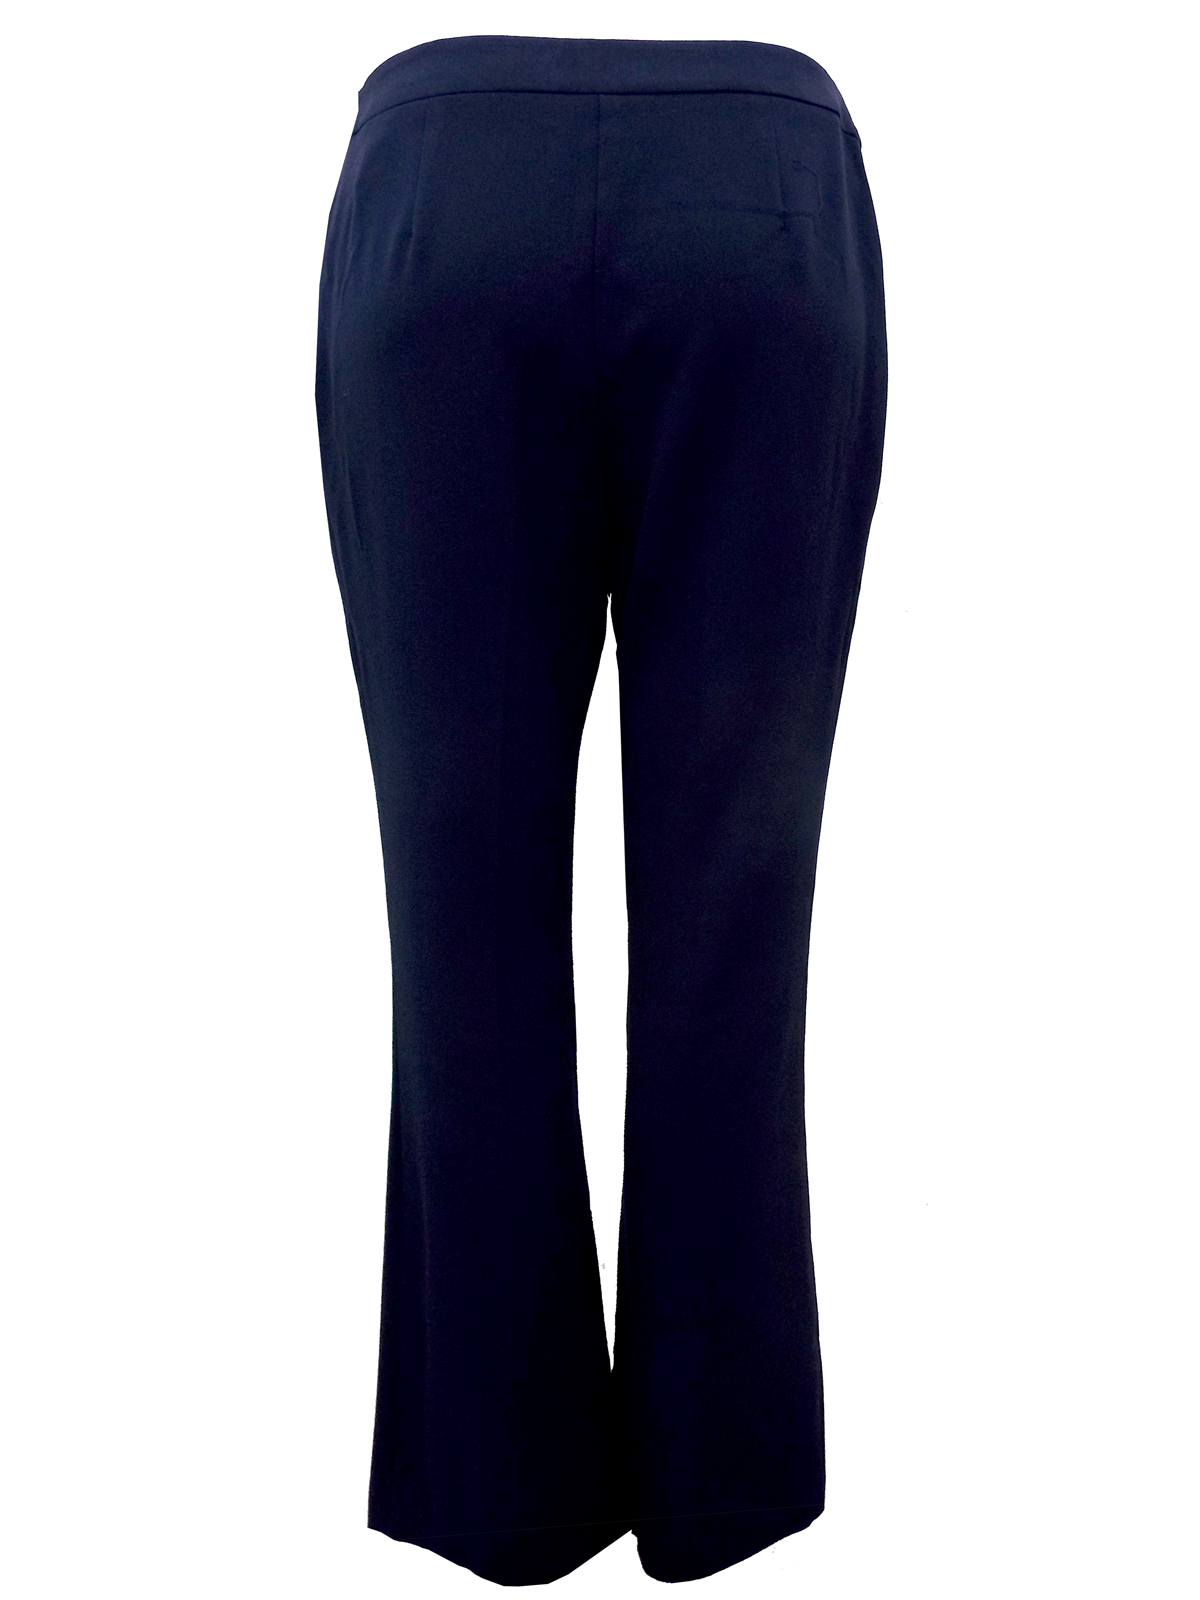 Marks and Spencer - - M&5 NAVY Flat Front Side Zip Flare Bootleg ...